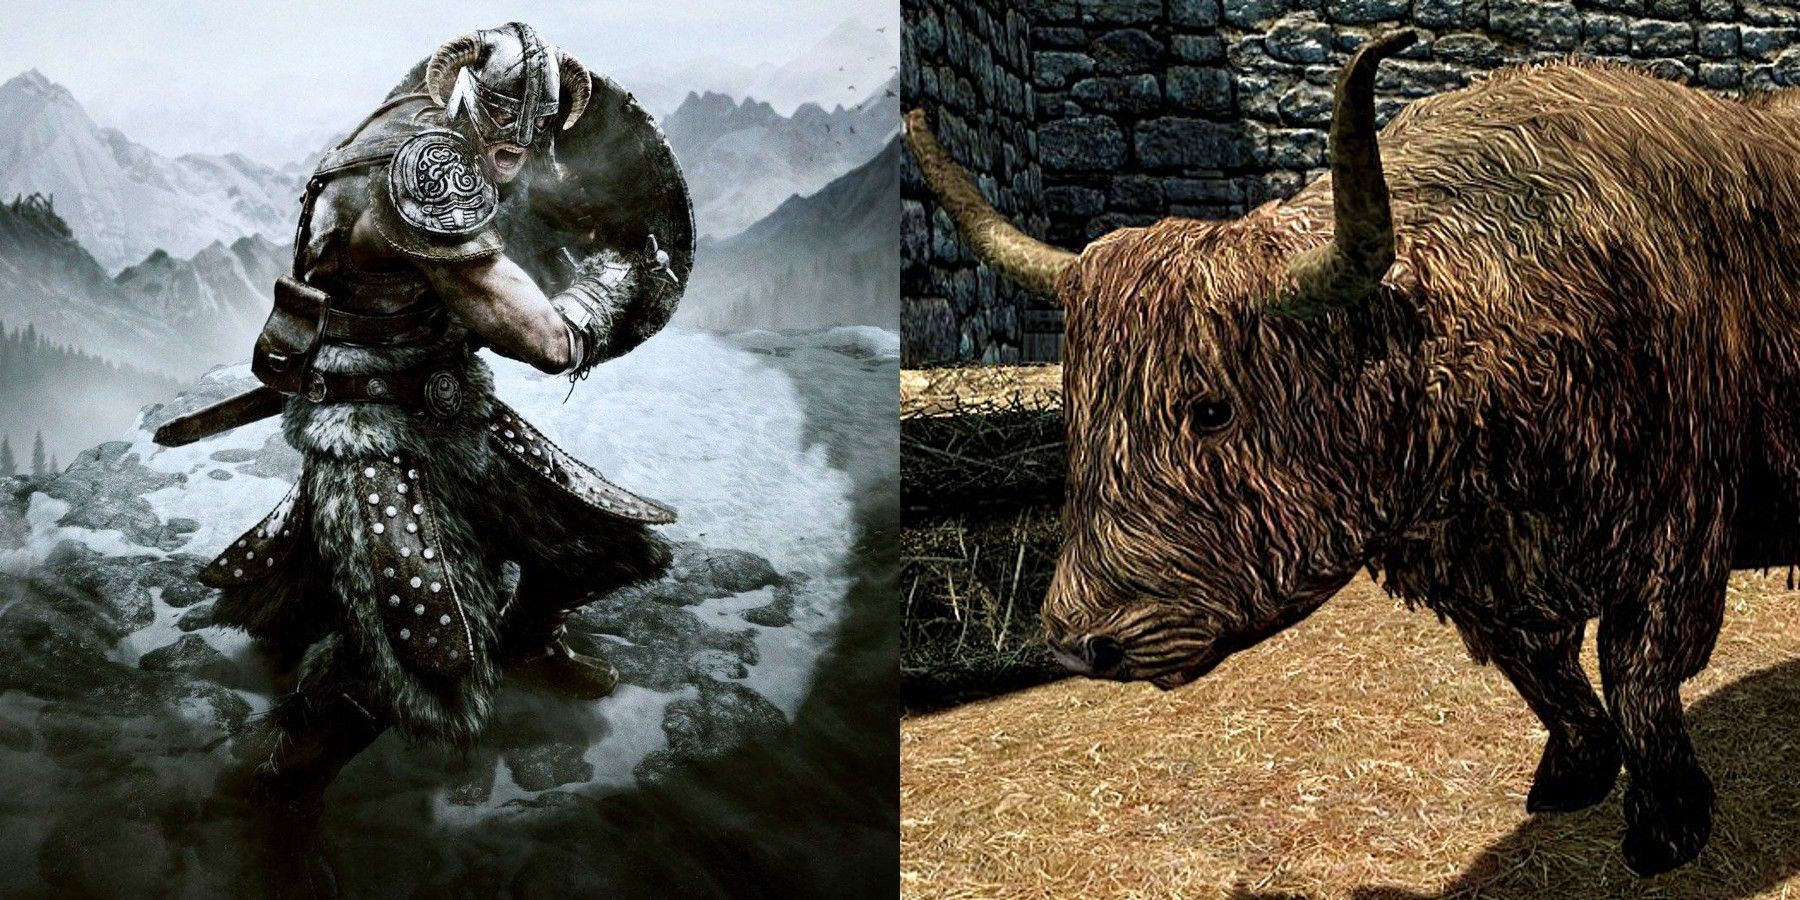 Weird Skyrim Clip Shows Cow Getting Punched and Turning Into Stone